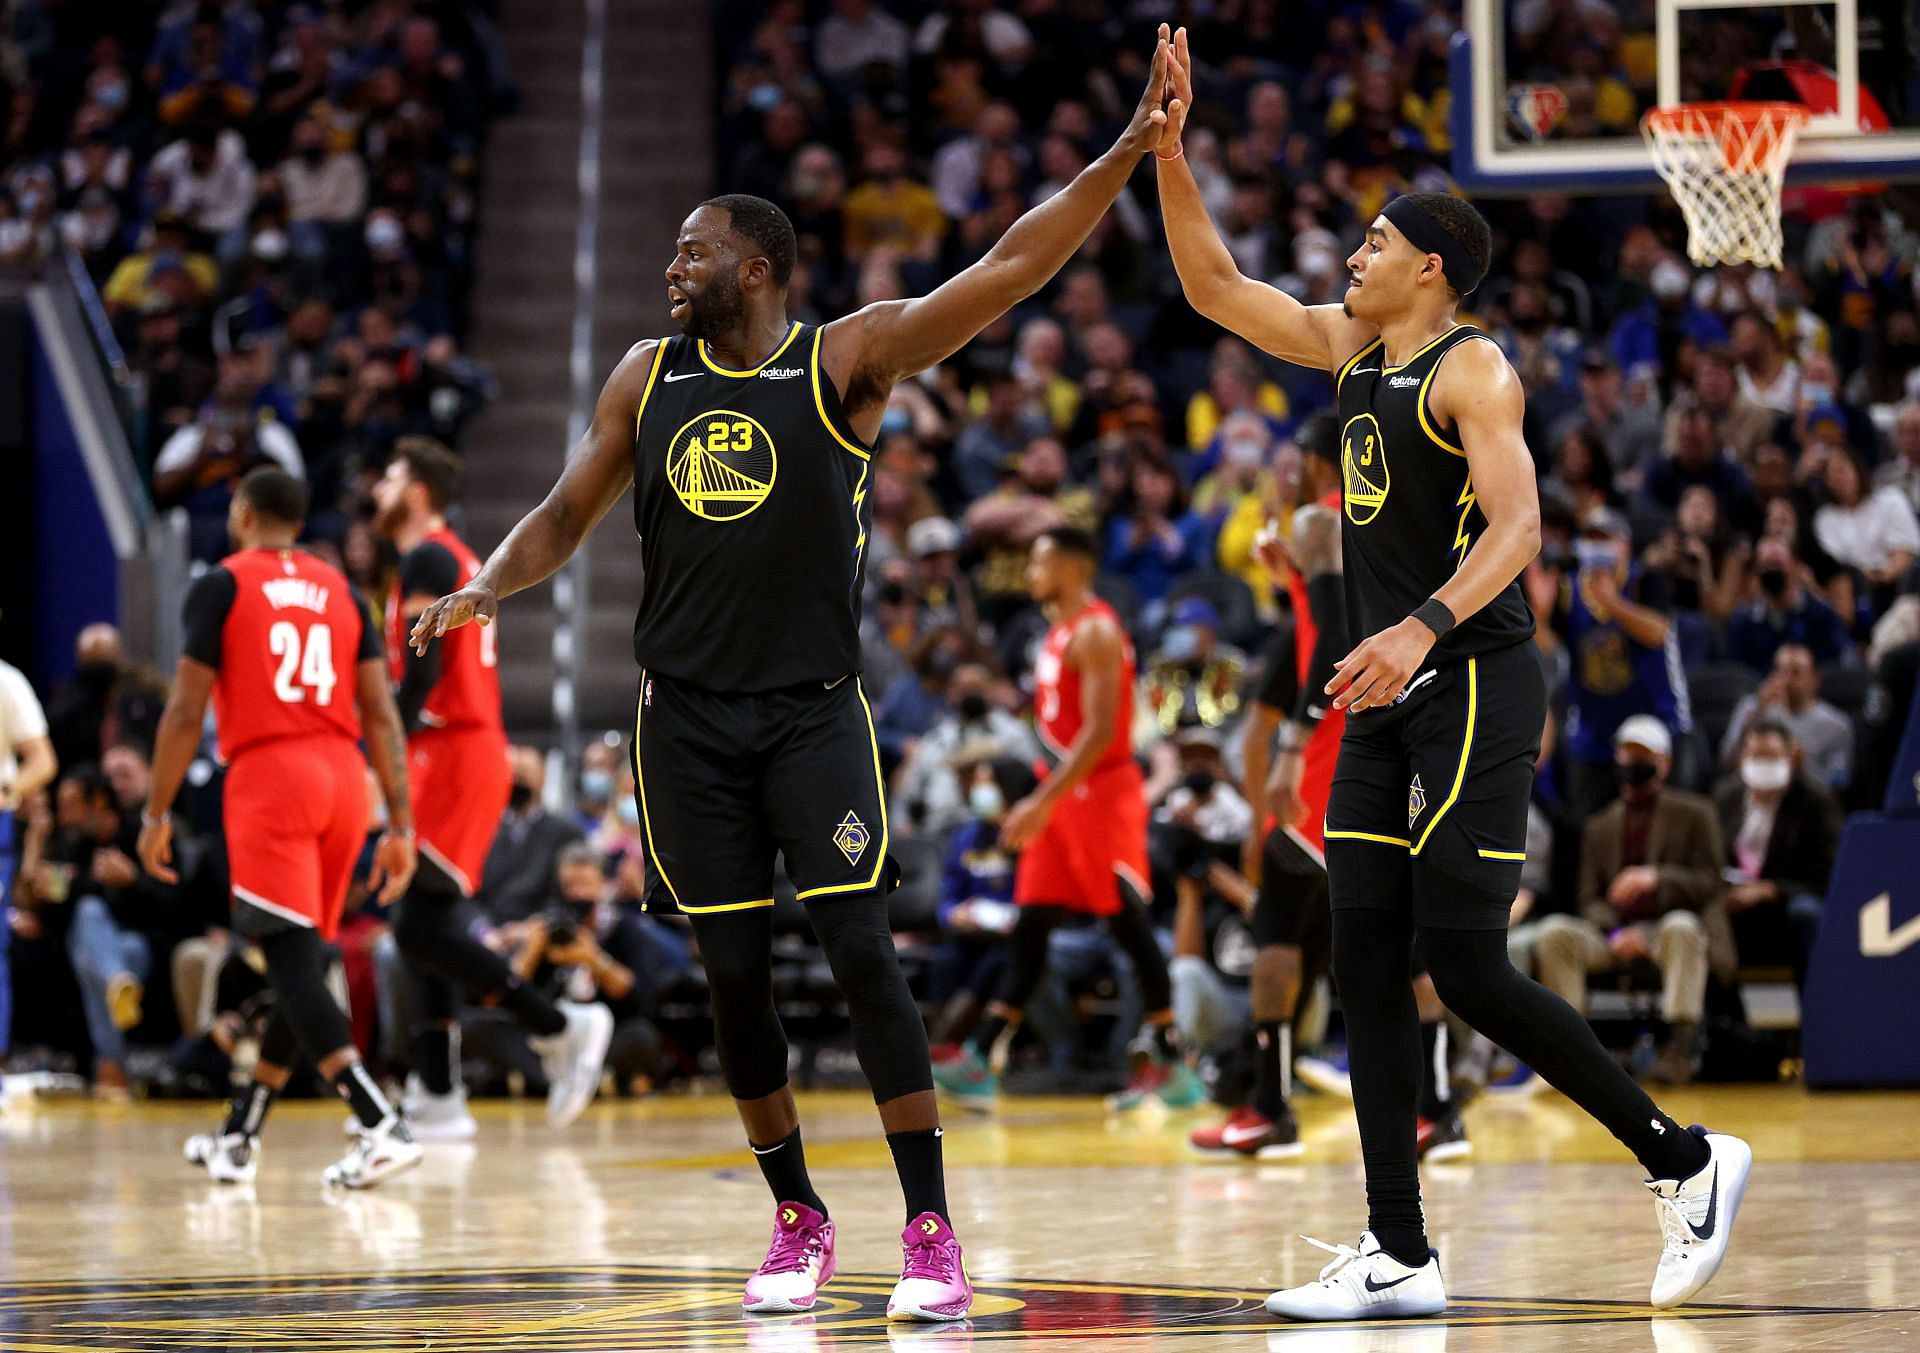 Golden State Warriors Draymond Green left and Jordan Poole right